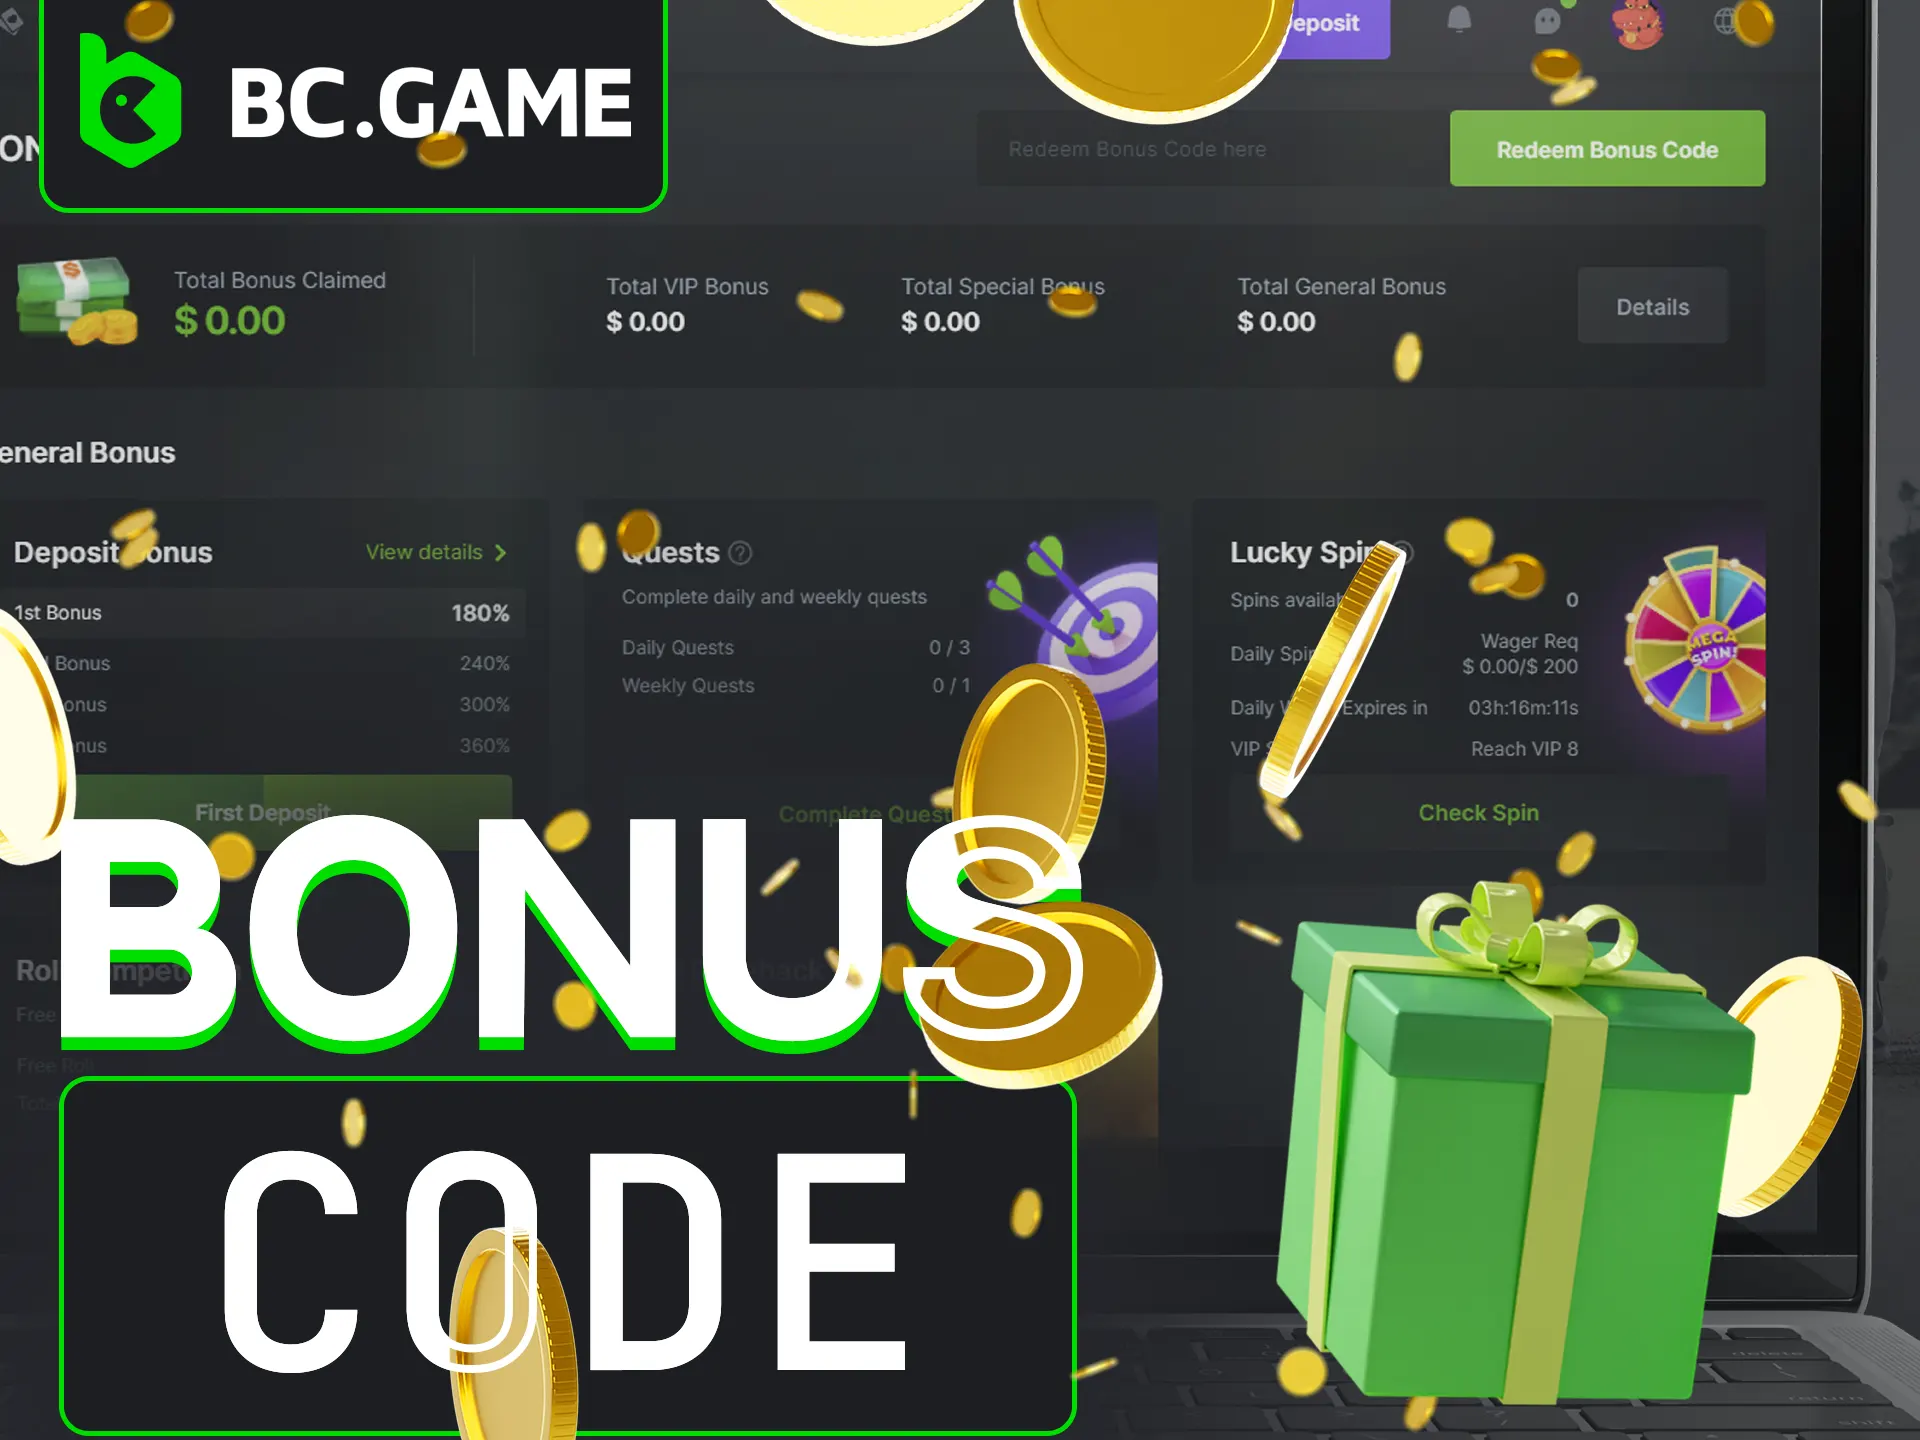 Get free coins with BC Game bonus codes.